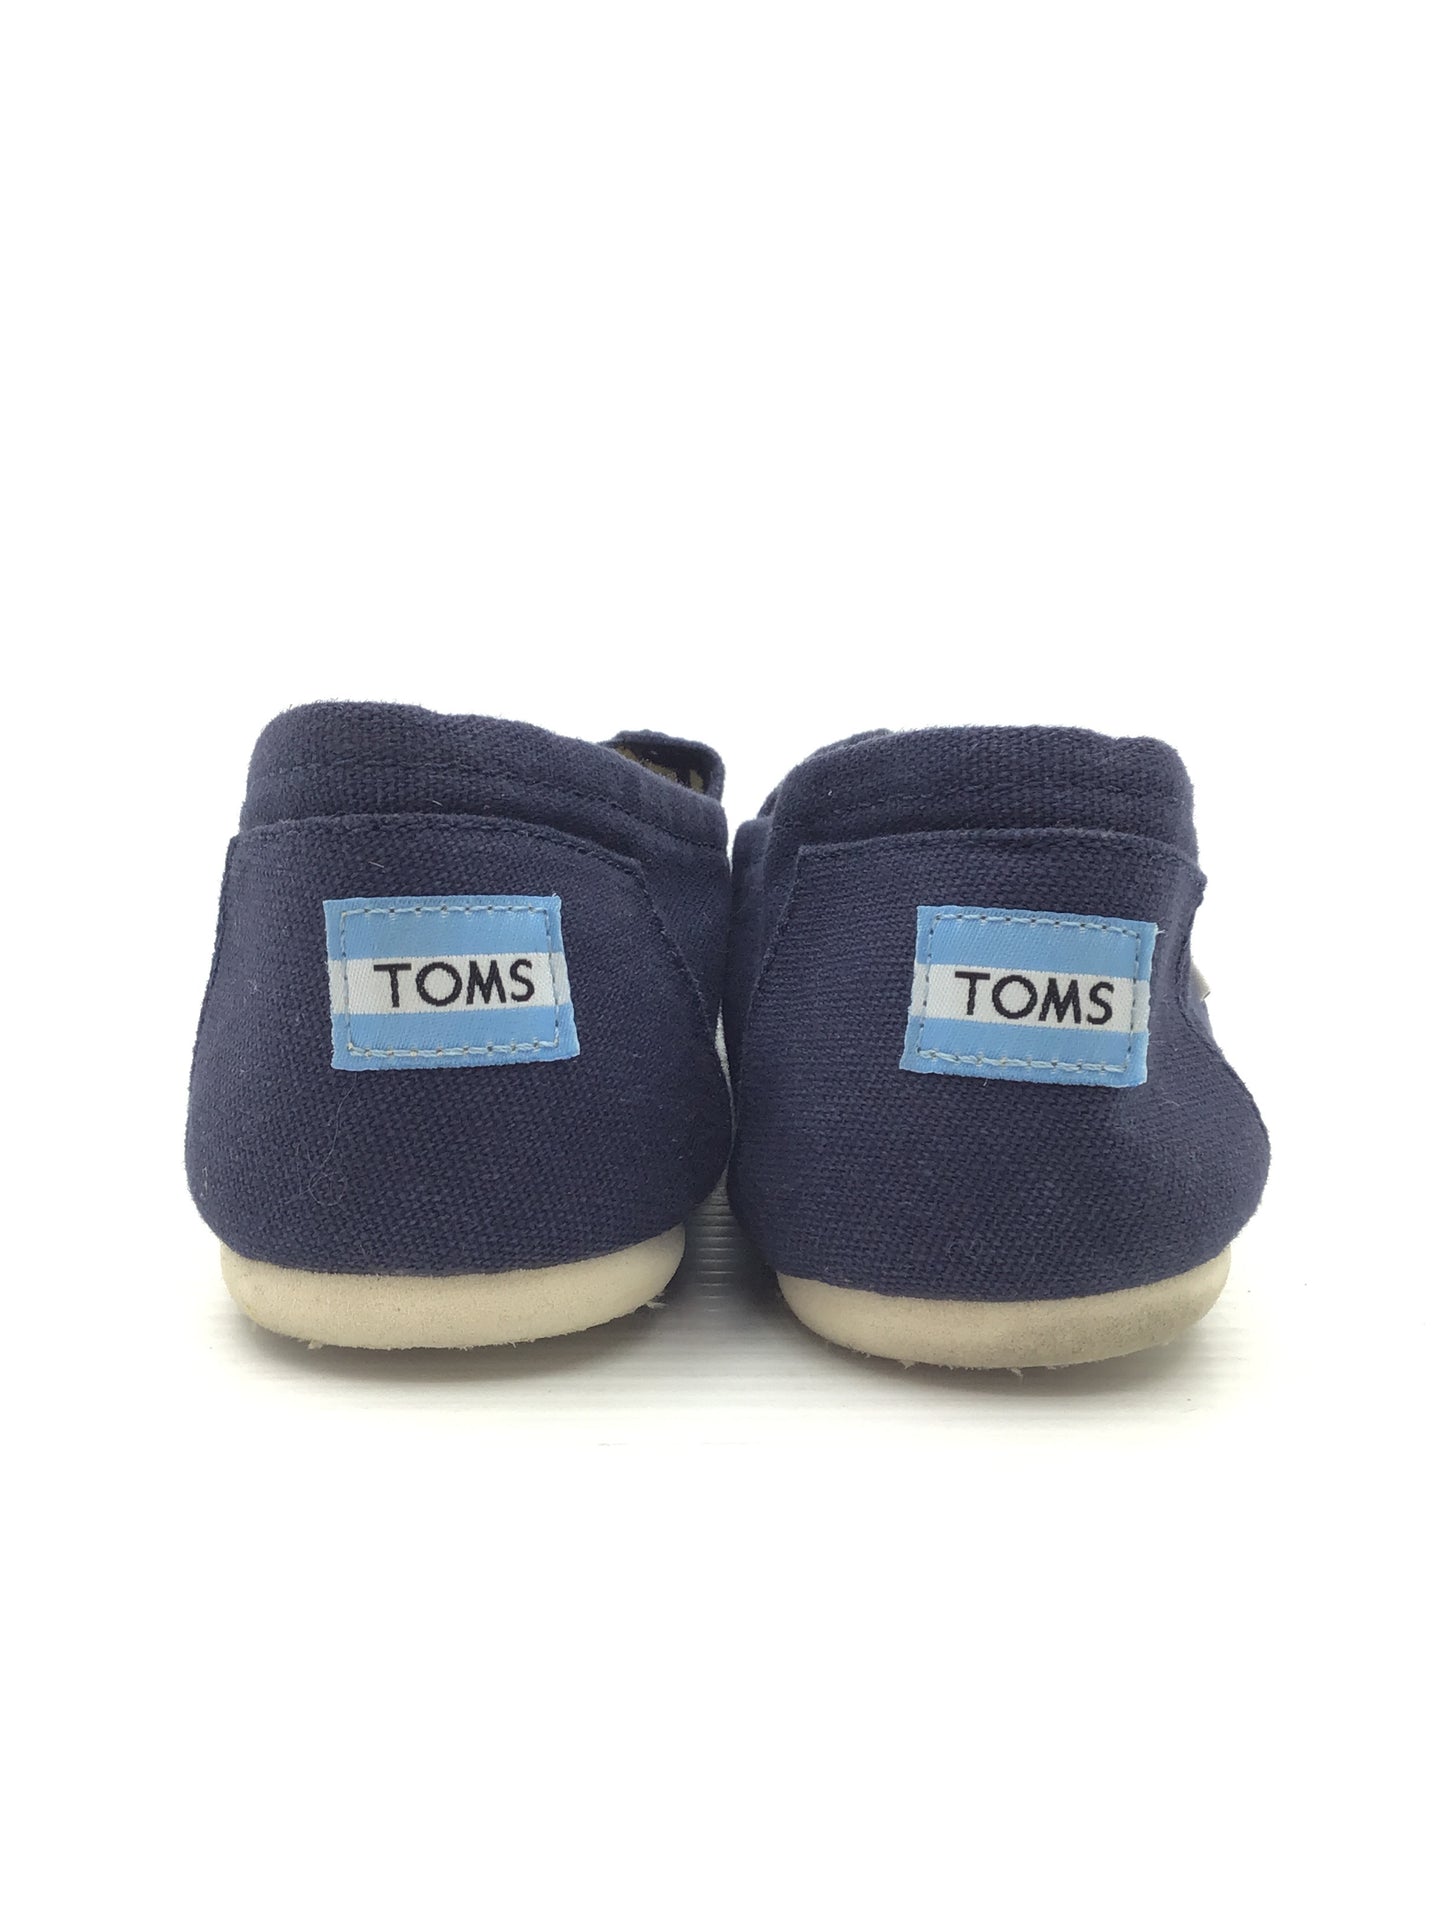 Shoes Flats Other By Toms  Size: 9.5